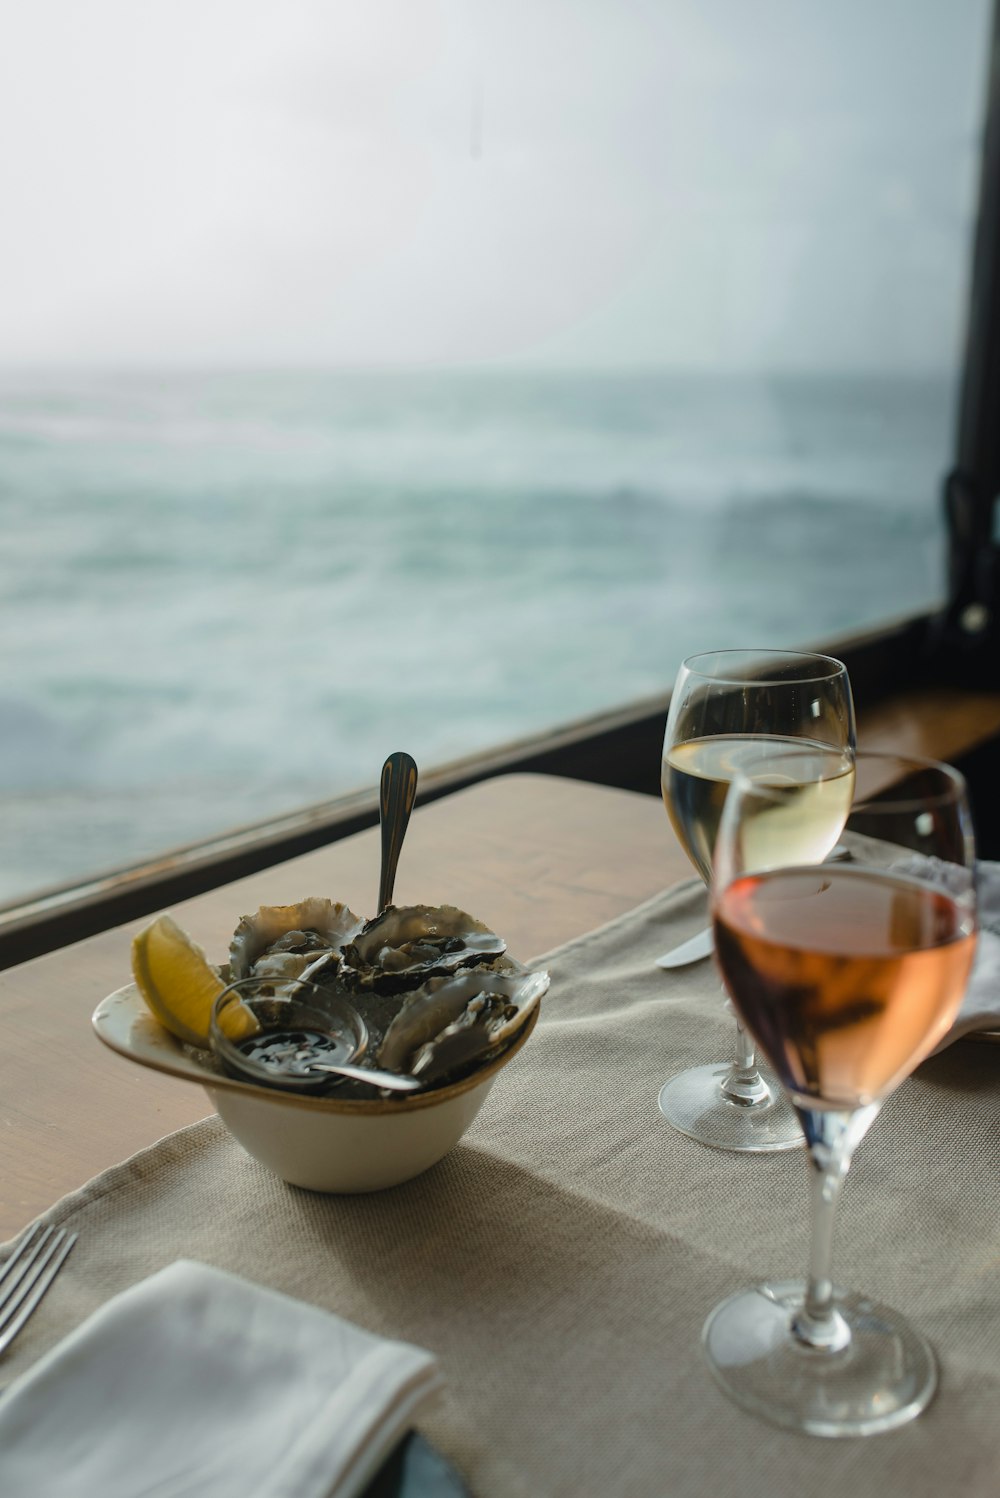 a bowl of oysters and a glass of wine on a table